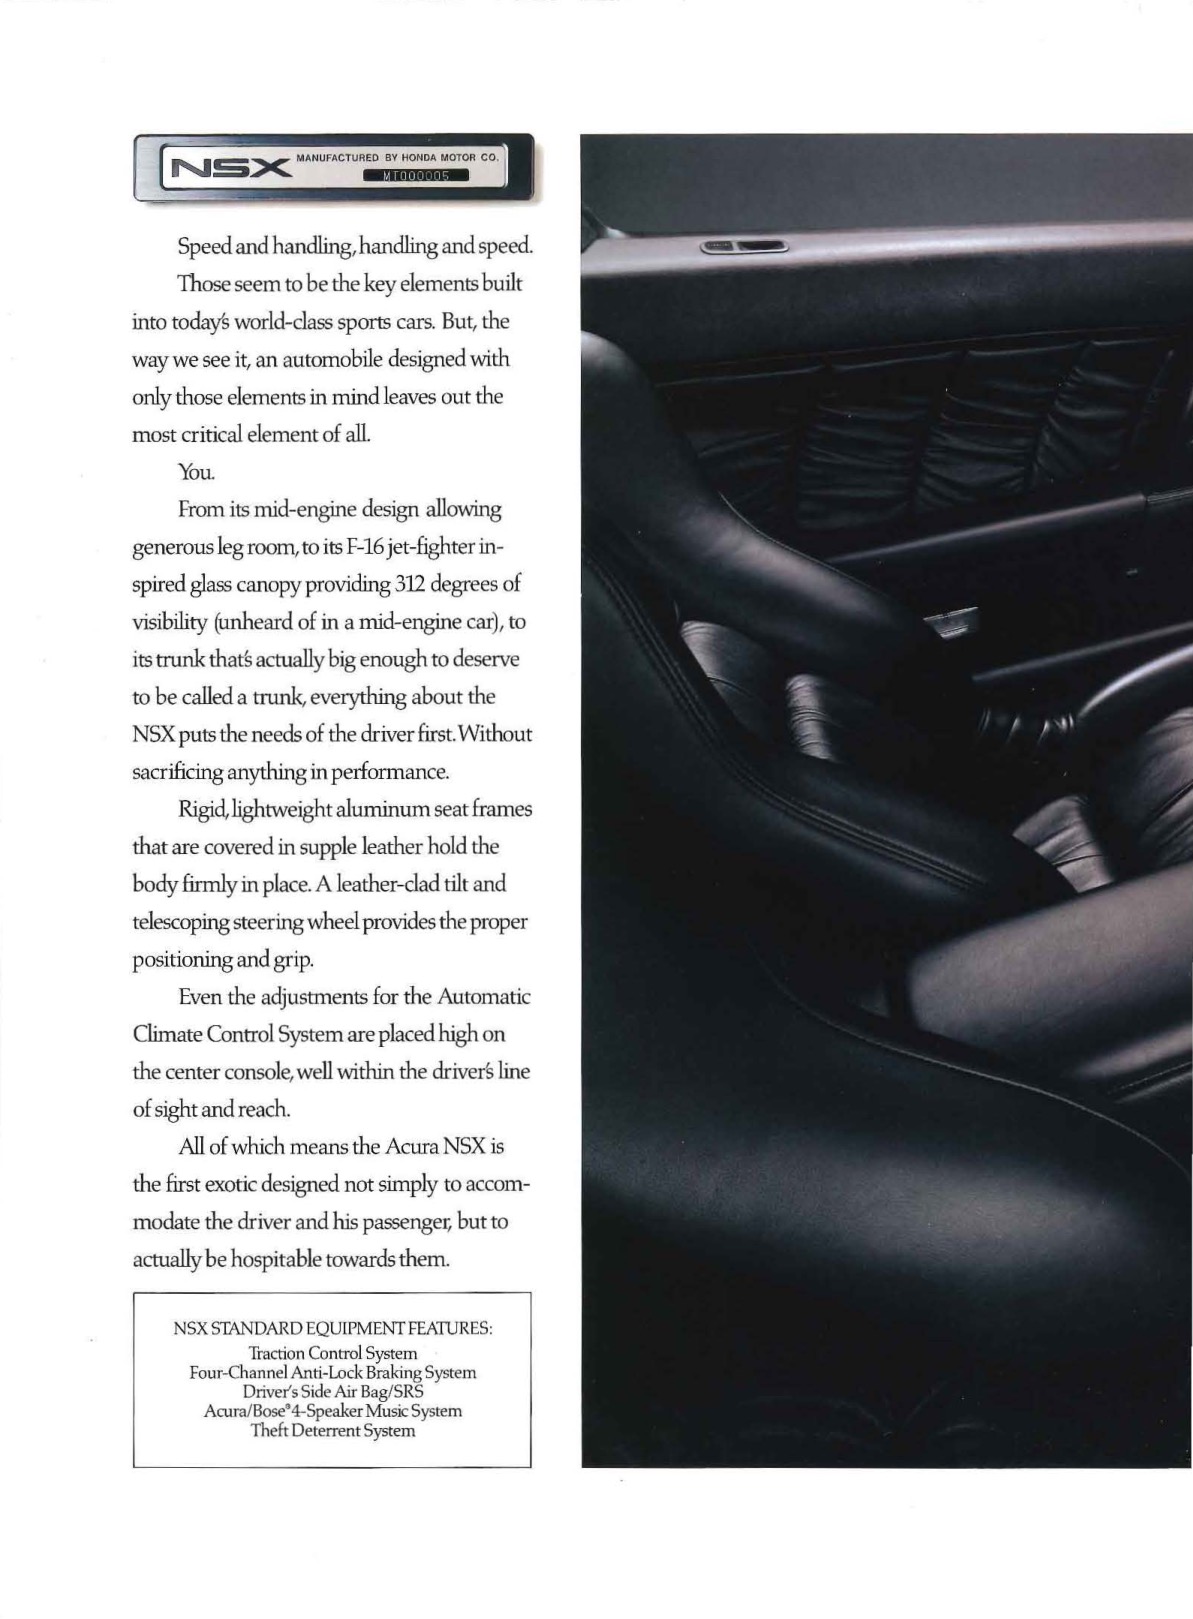 1991 Acura NSX Brochure Page 8